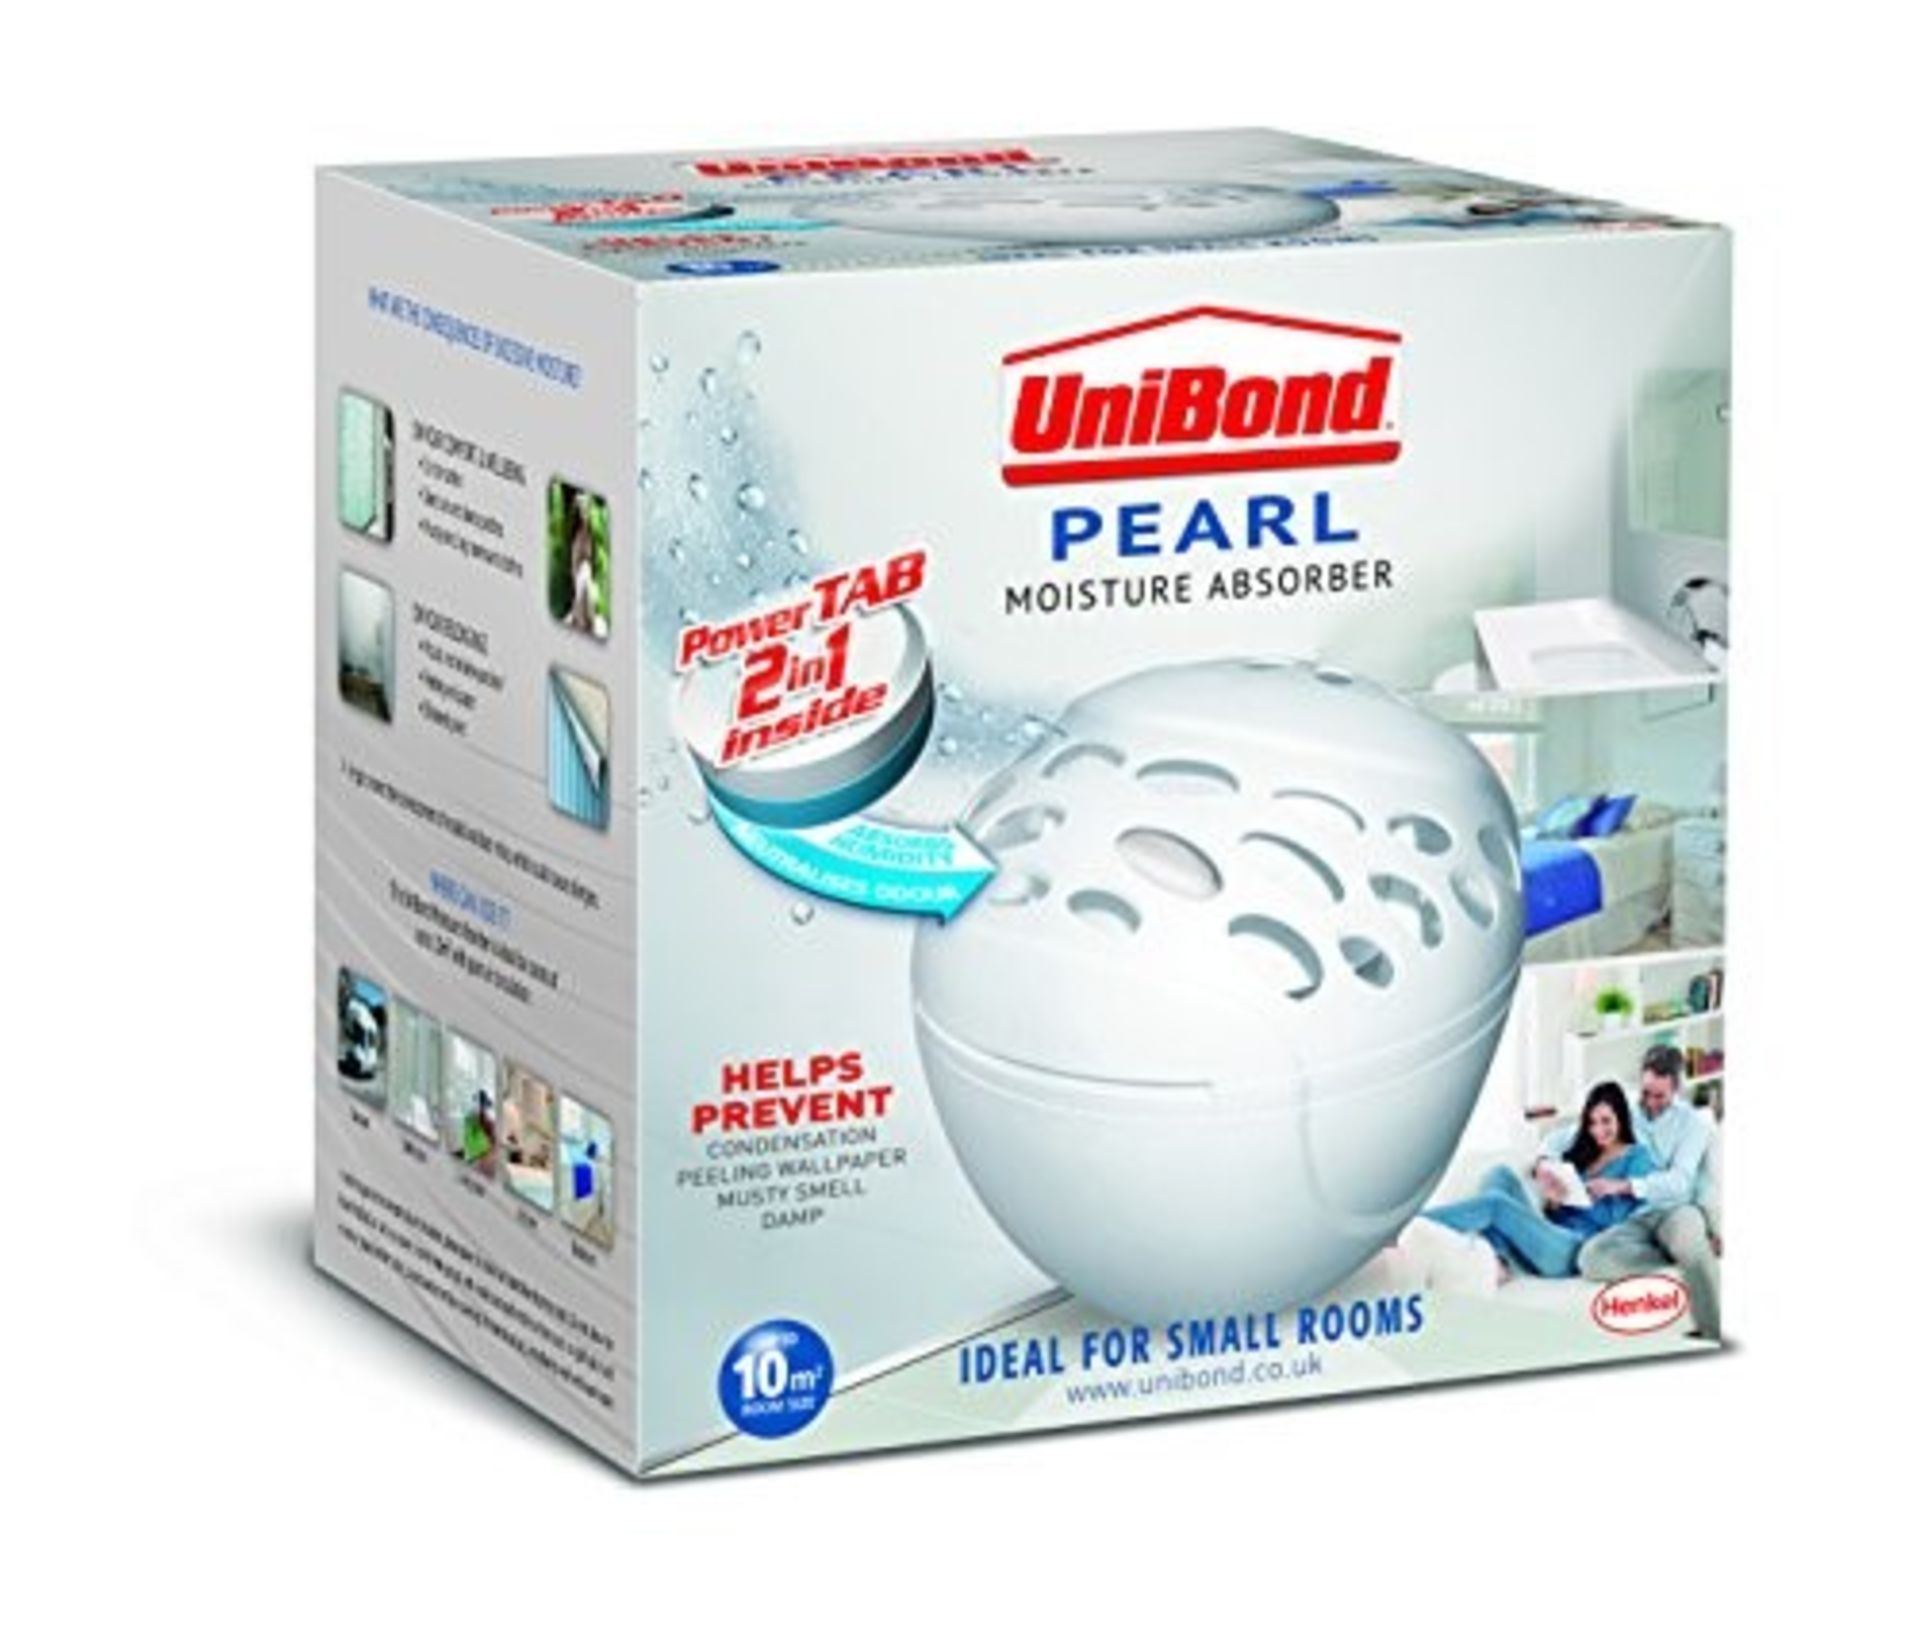 UniBond Pearl Moisture Absorber Device with 1 Tab